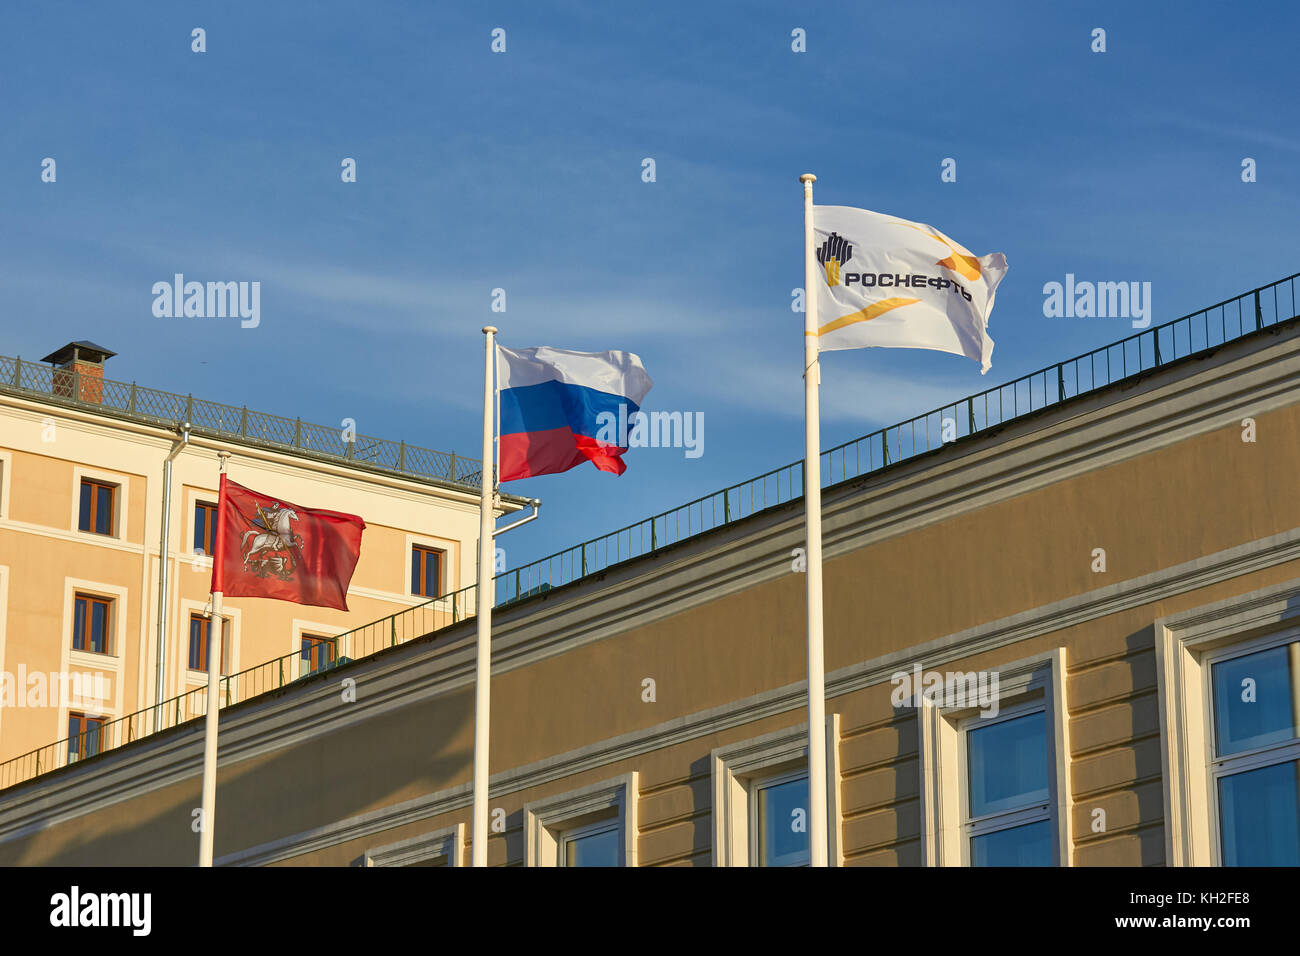 Moscow, Russia - September 1, 2016: A Russian Federation flag flies between flags of displaying the Moscow city coat of arms (at left), and the Rosnef Stock Photo